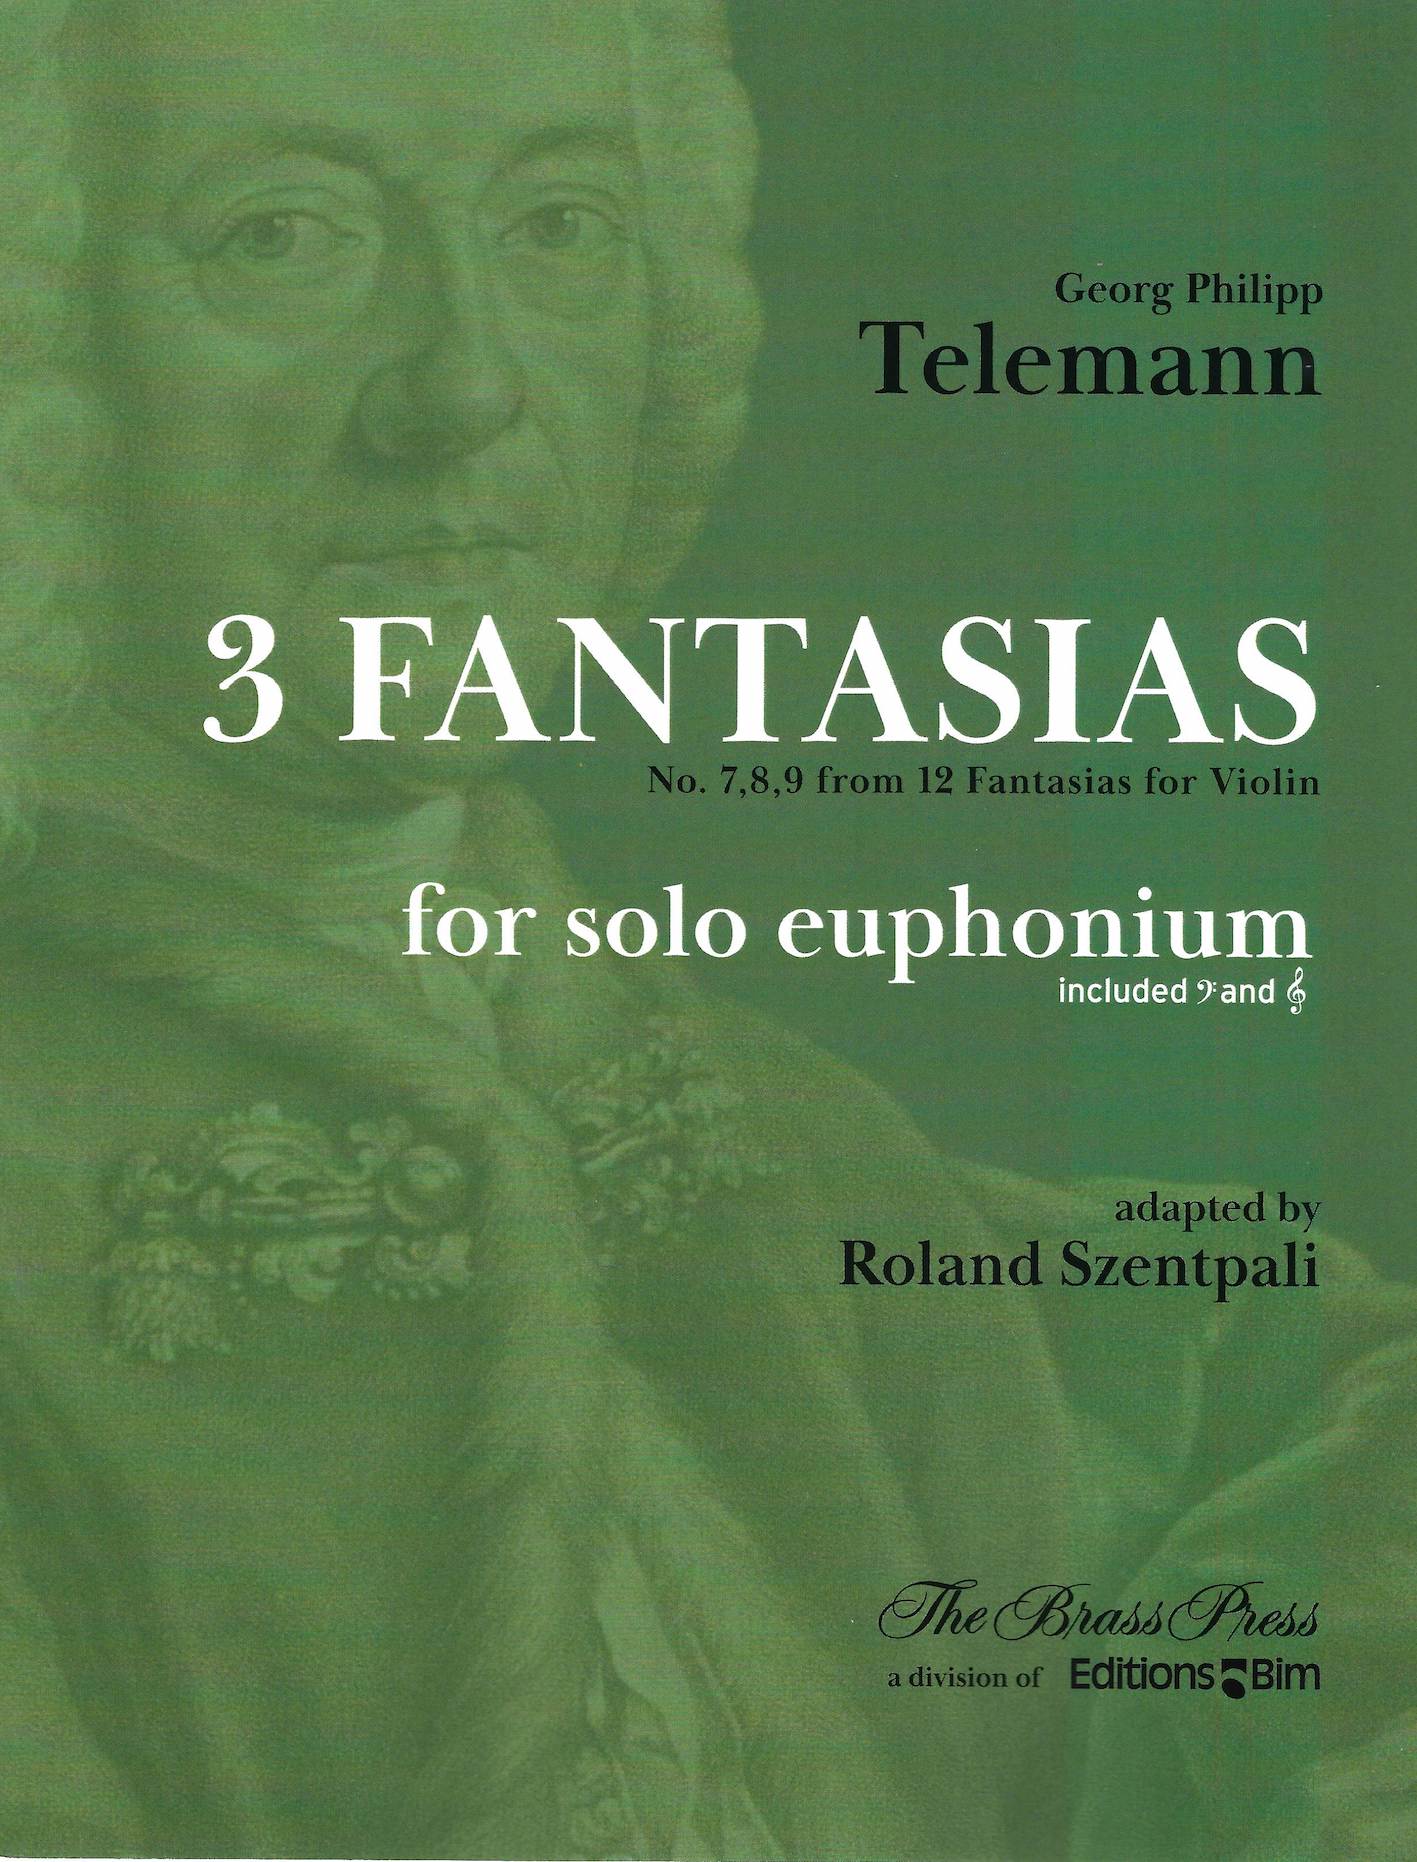 Three Fantasias (from Nos.7,8,9 from 12 Fantasias for Violin) - G.P.Telemann - adapted by Roland Szentpali